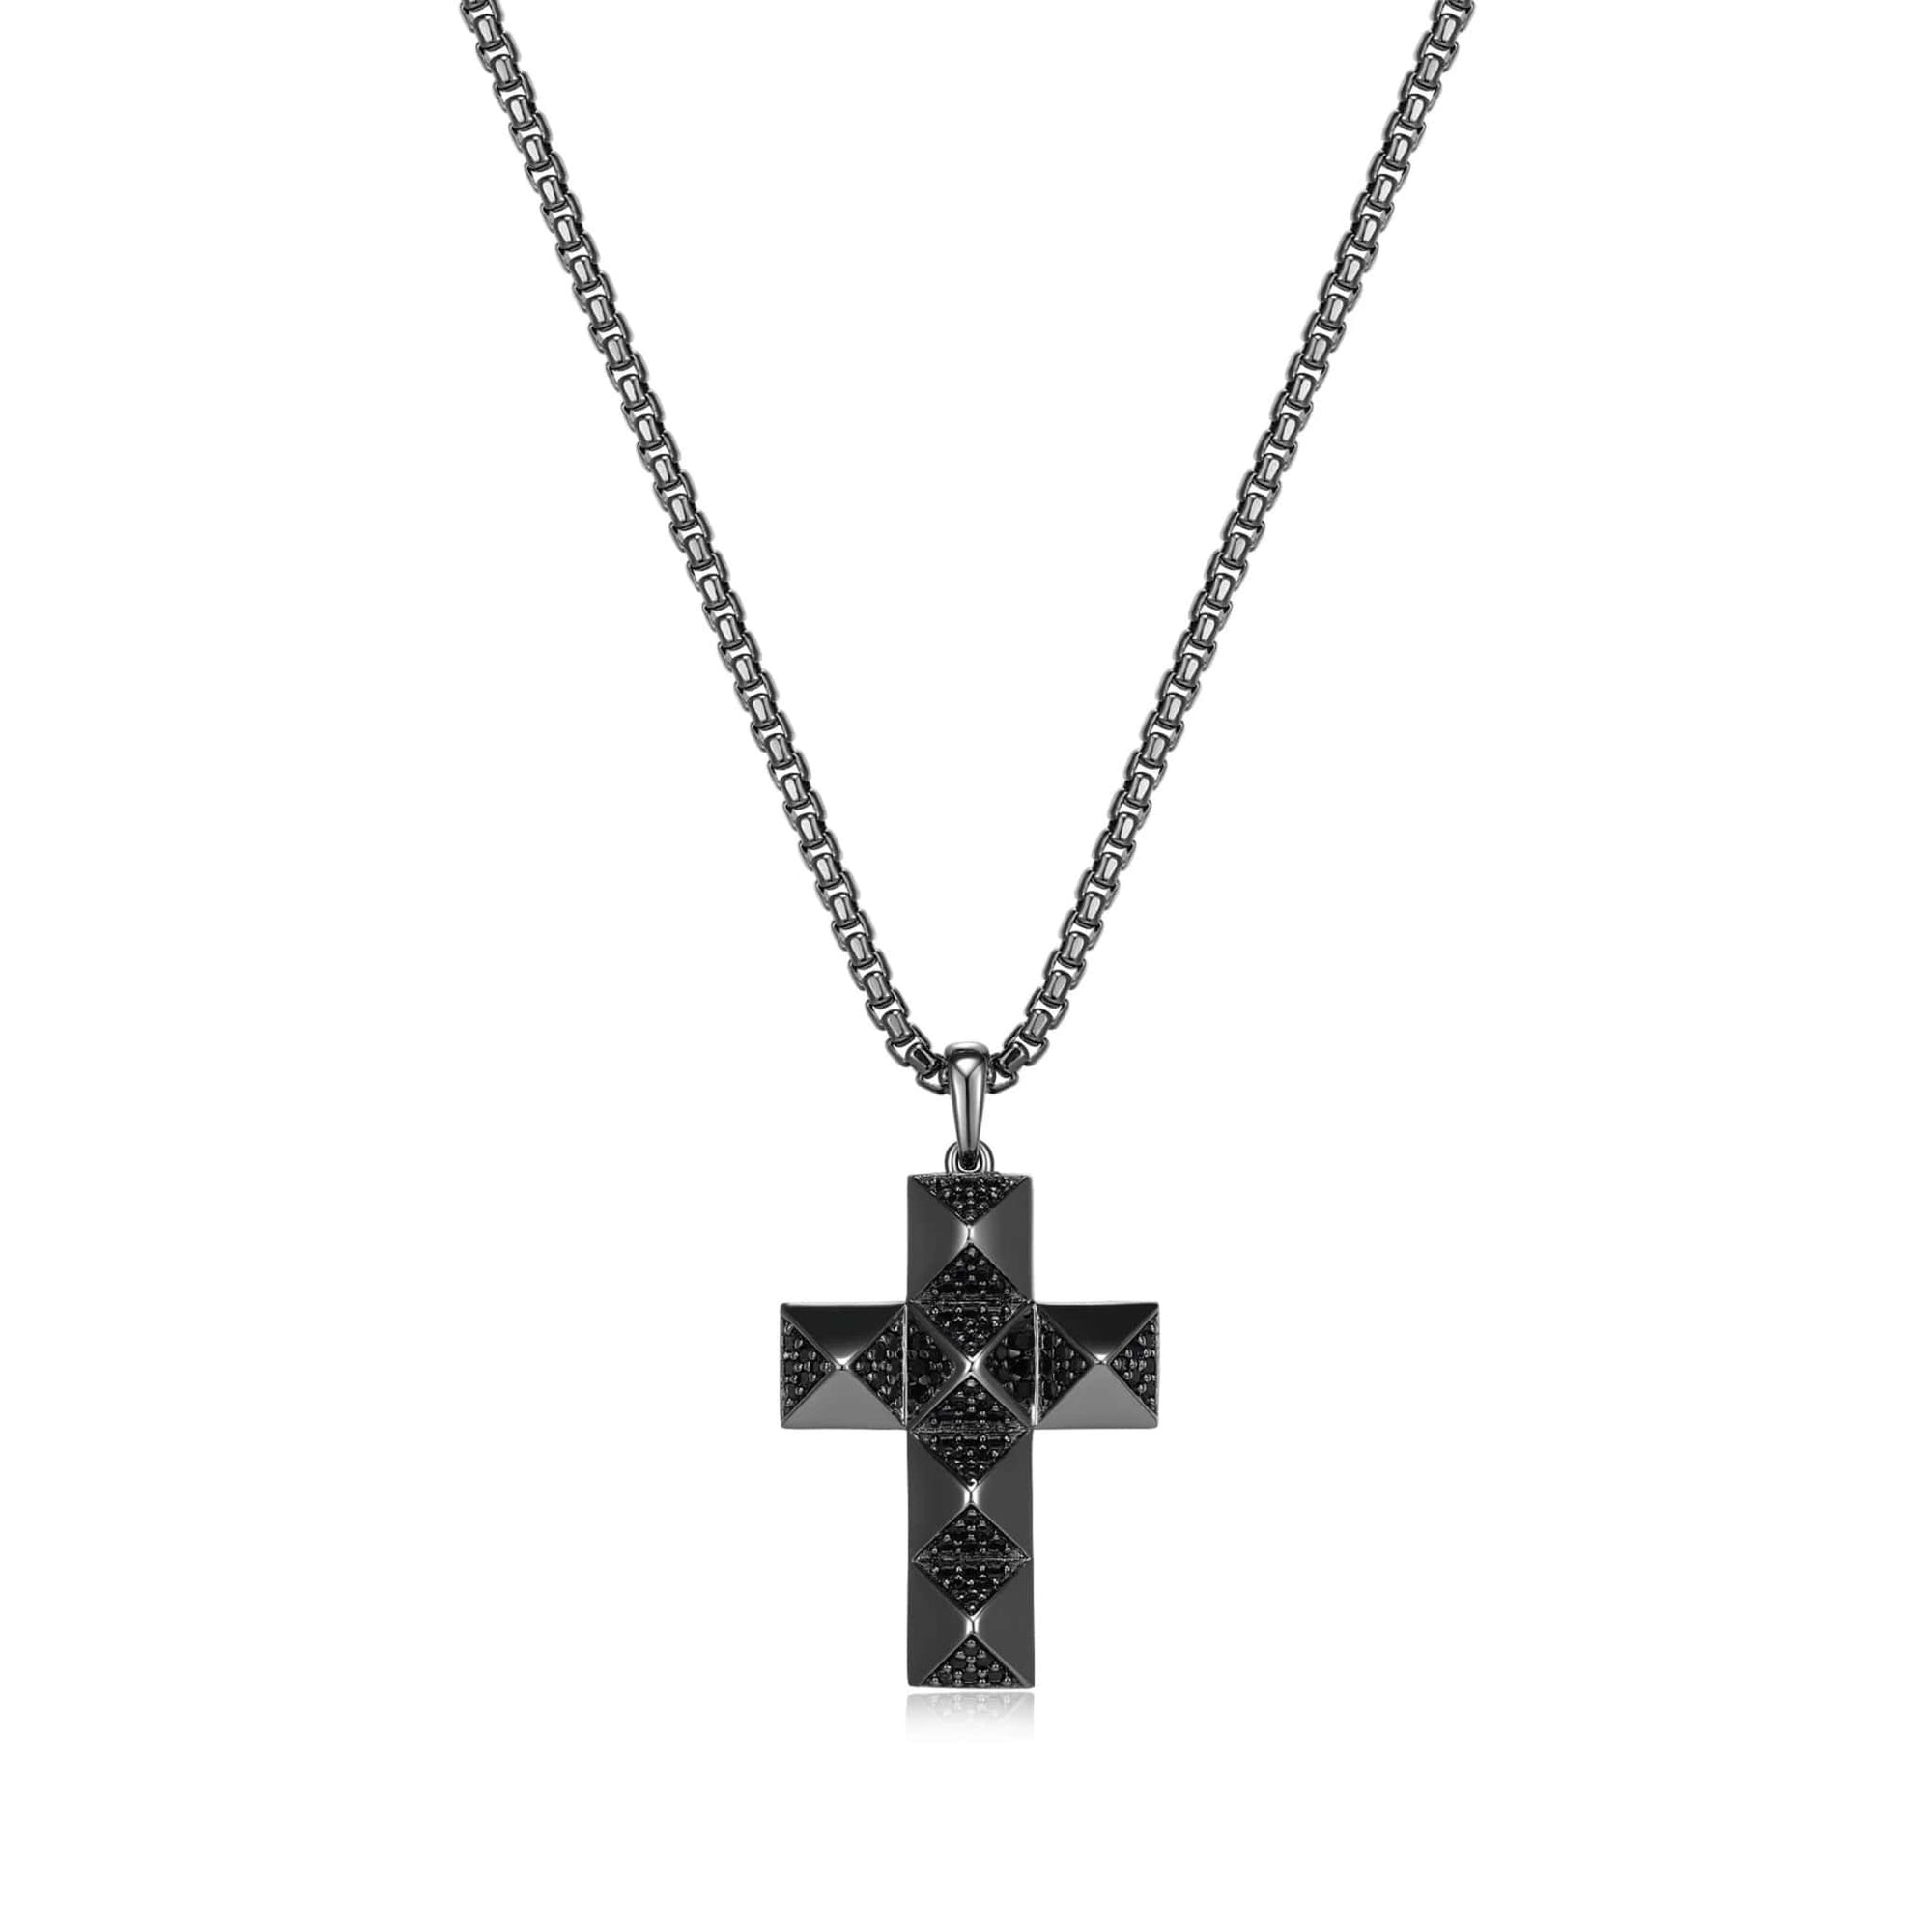 ETHOS "Black Ice" Silver Cross Necklace at Arman's Jewellers Kitchener